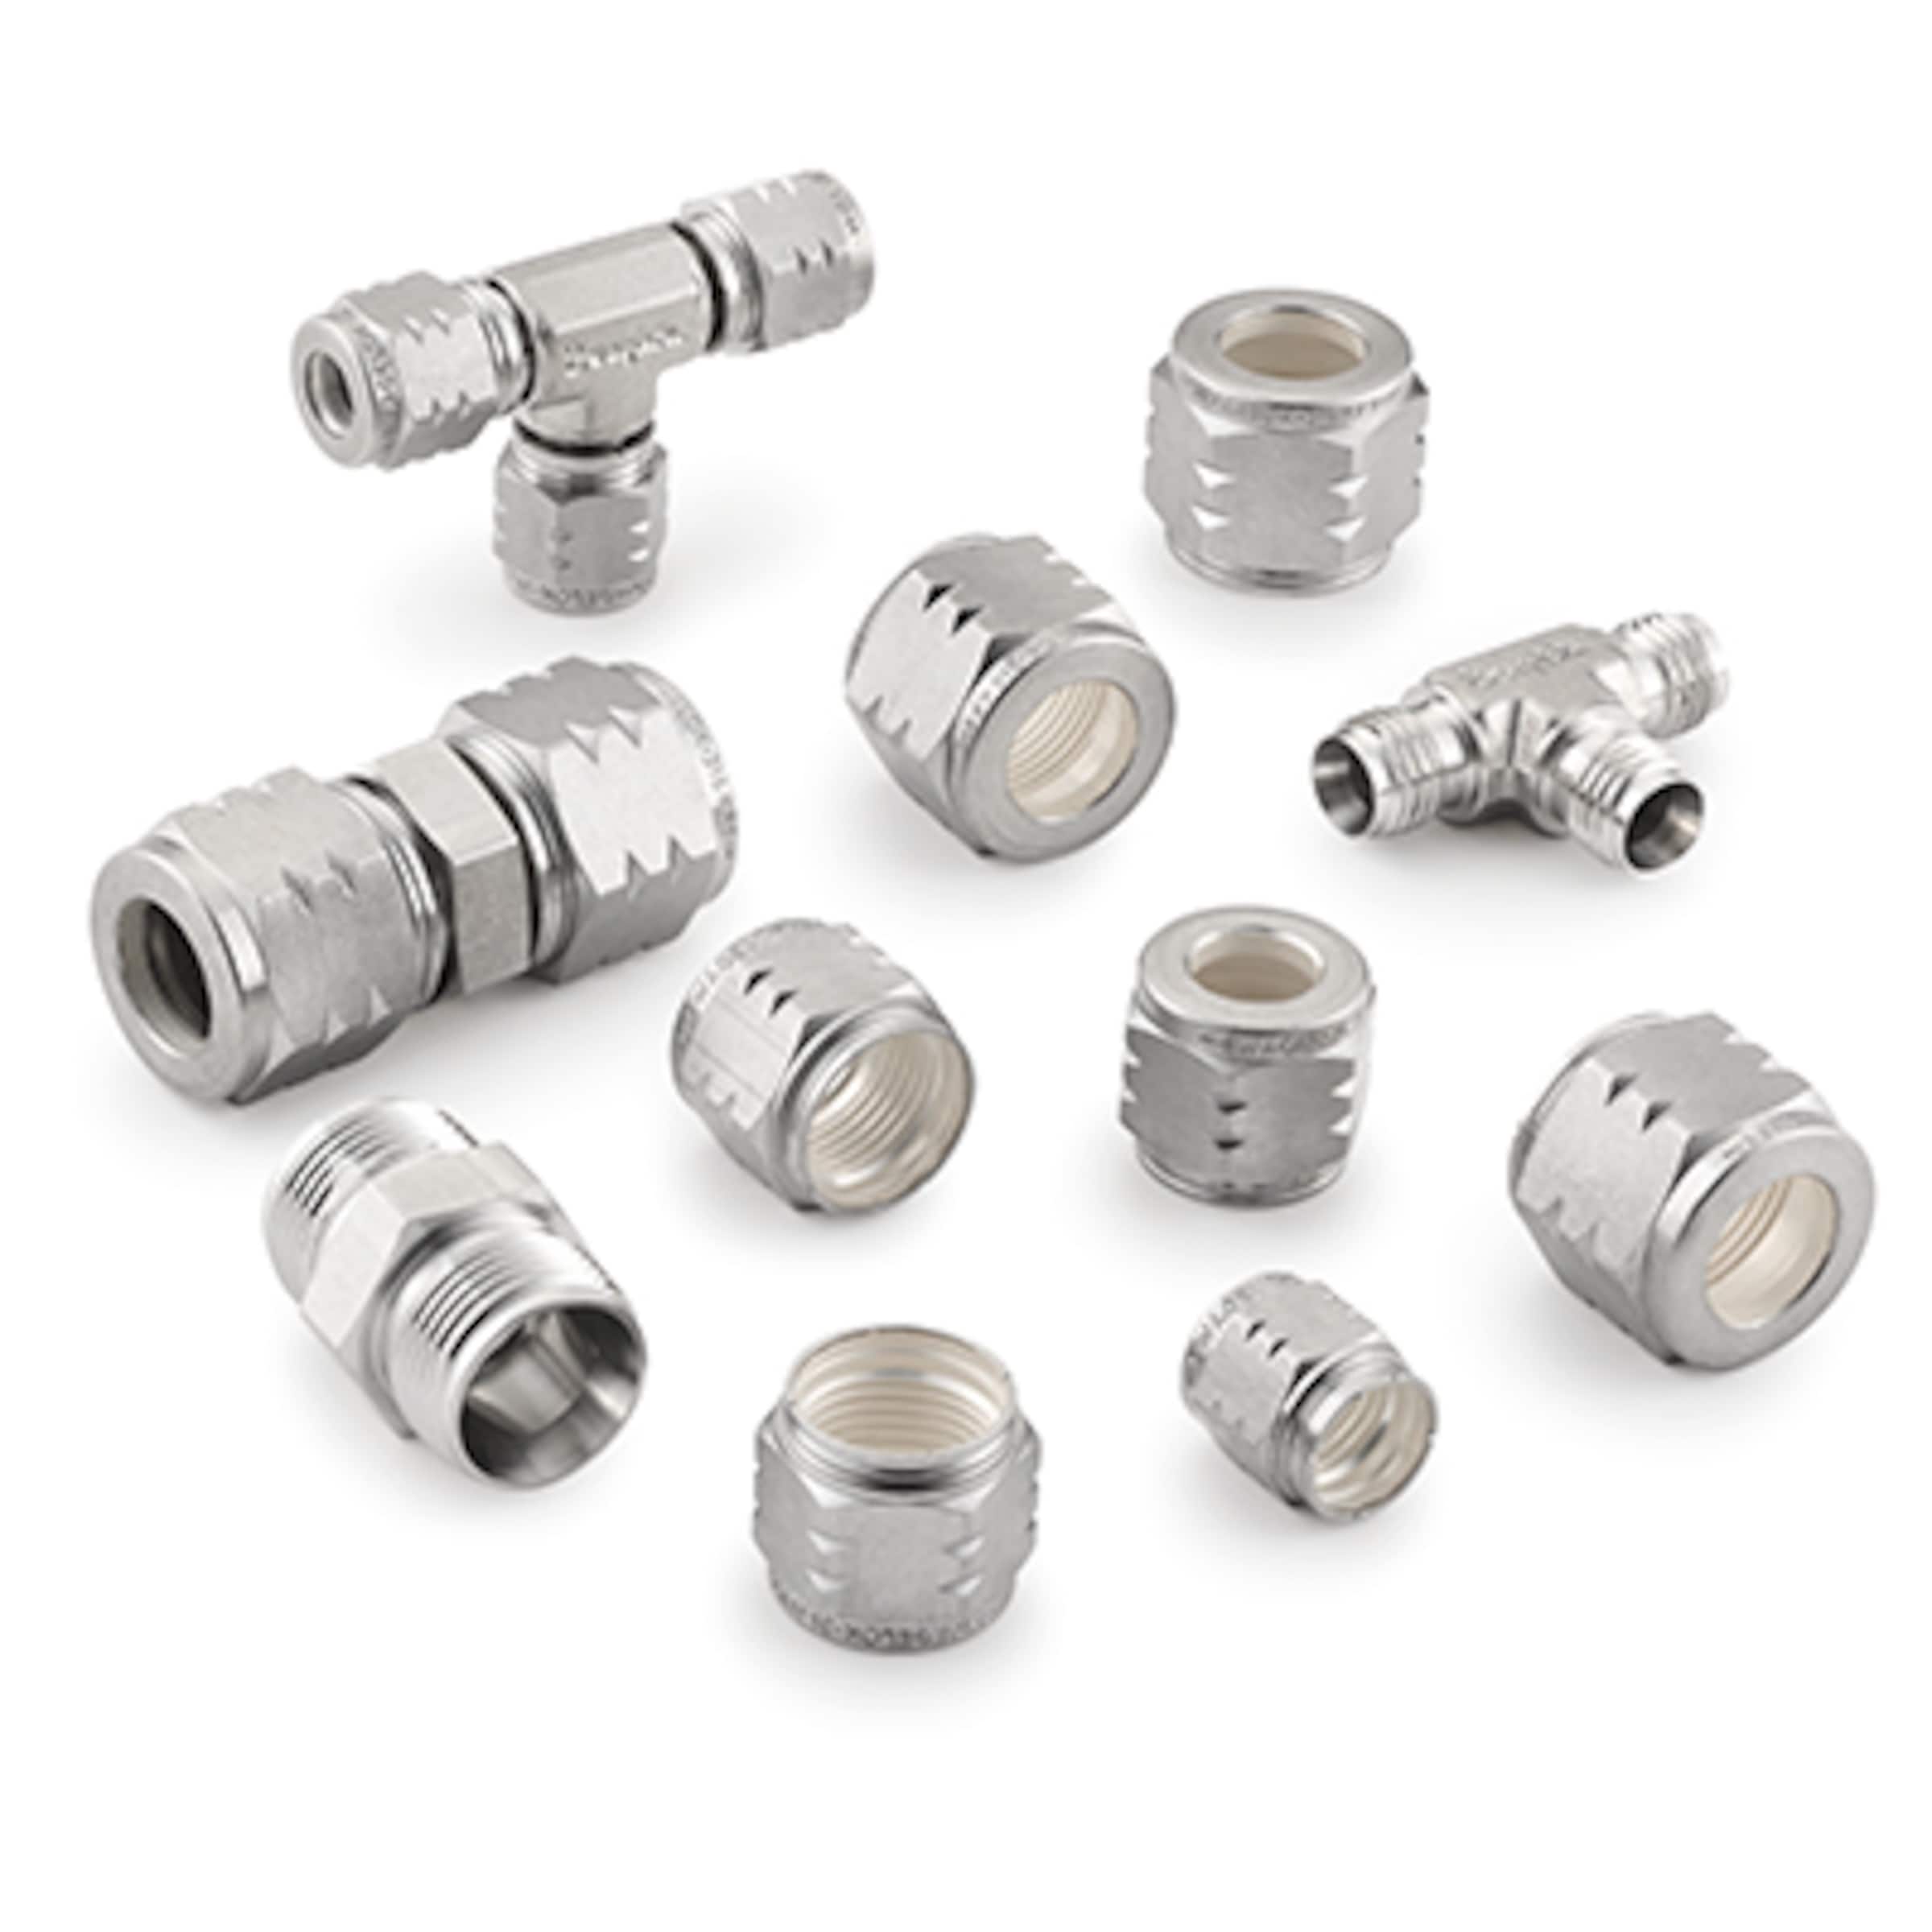 Assembly-by-Torque Fittings (AbT)